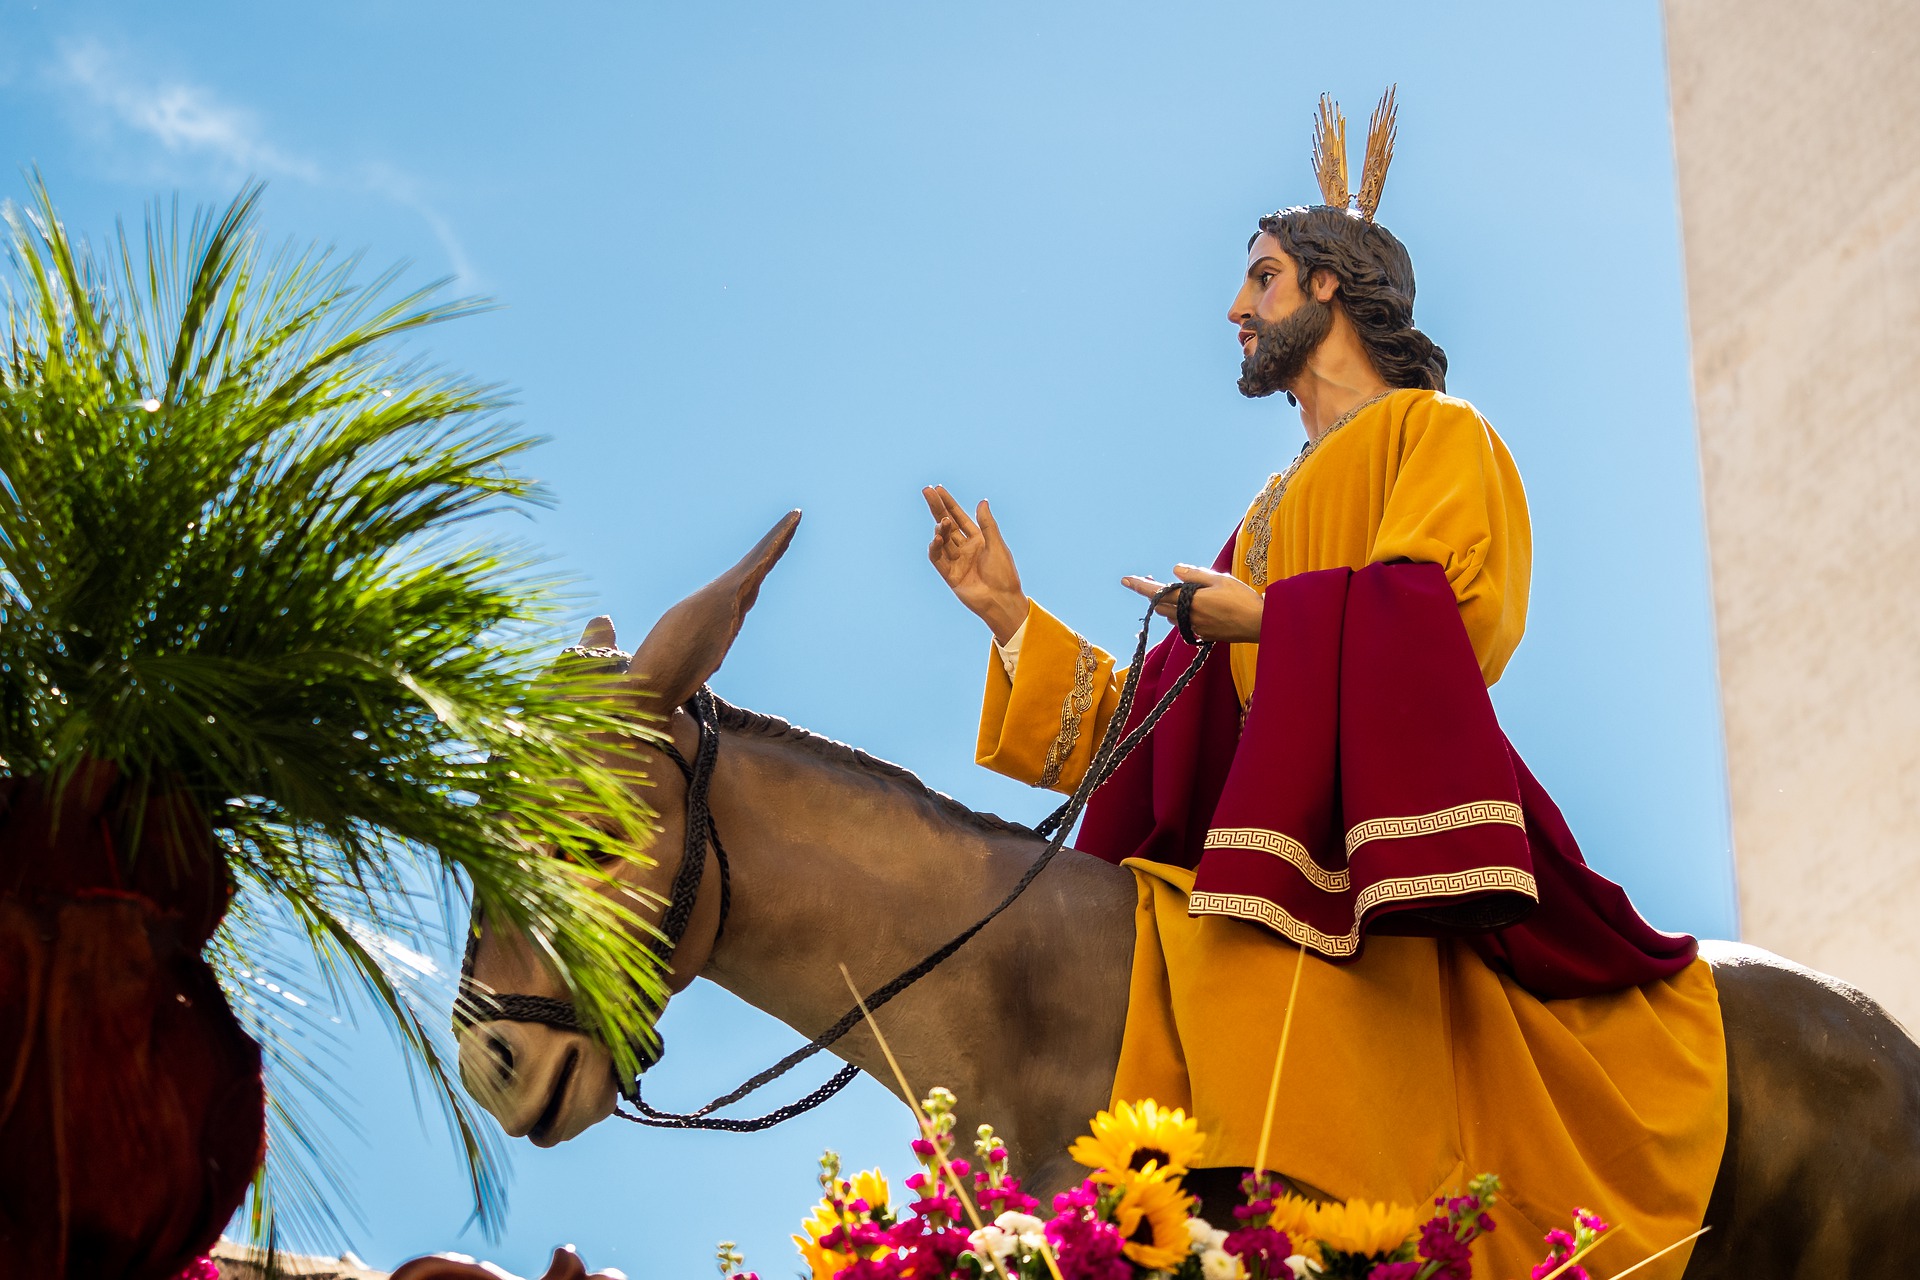 6th Sunday of Lent: Everyone Loves a Parade